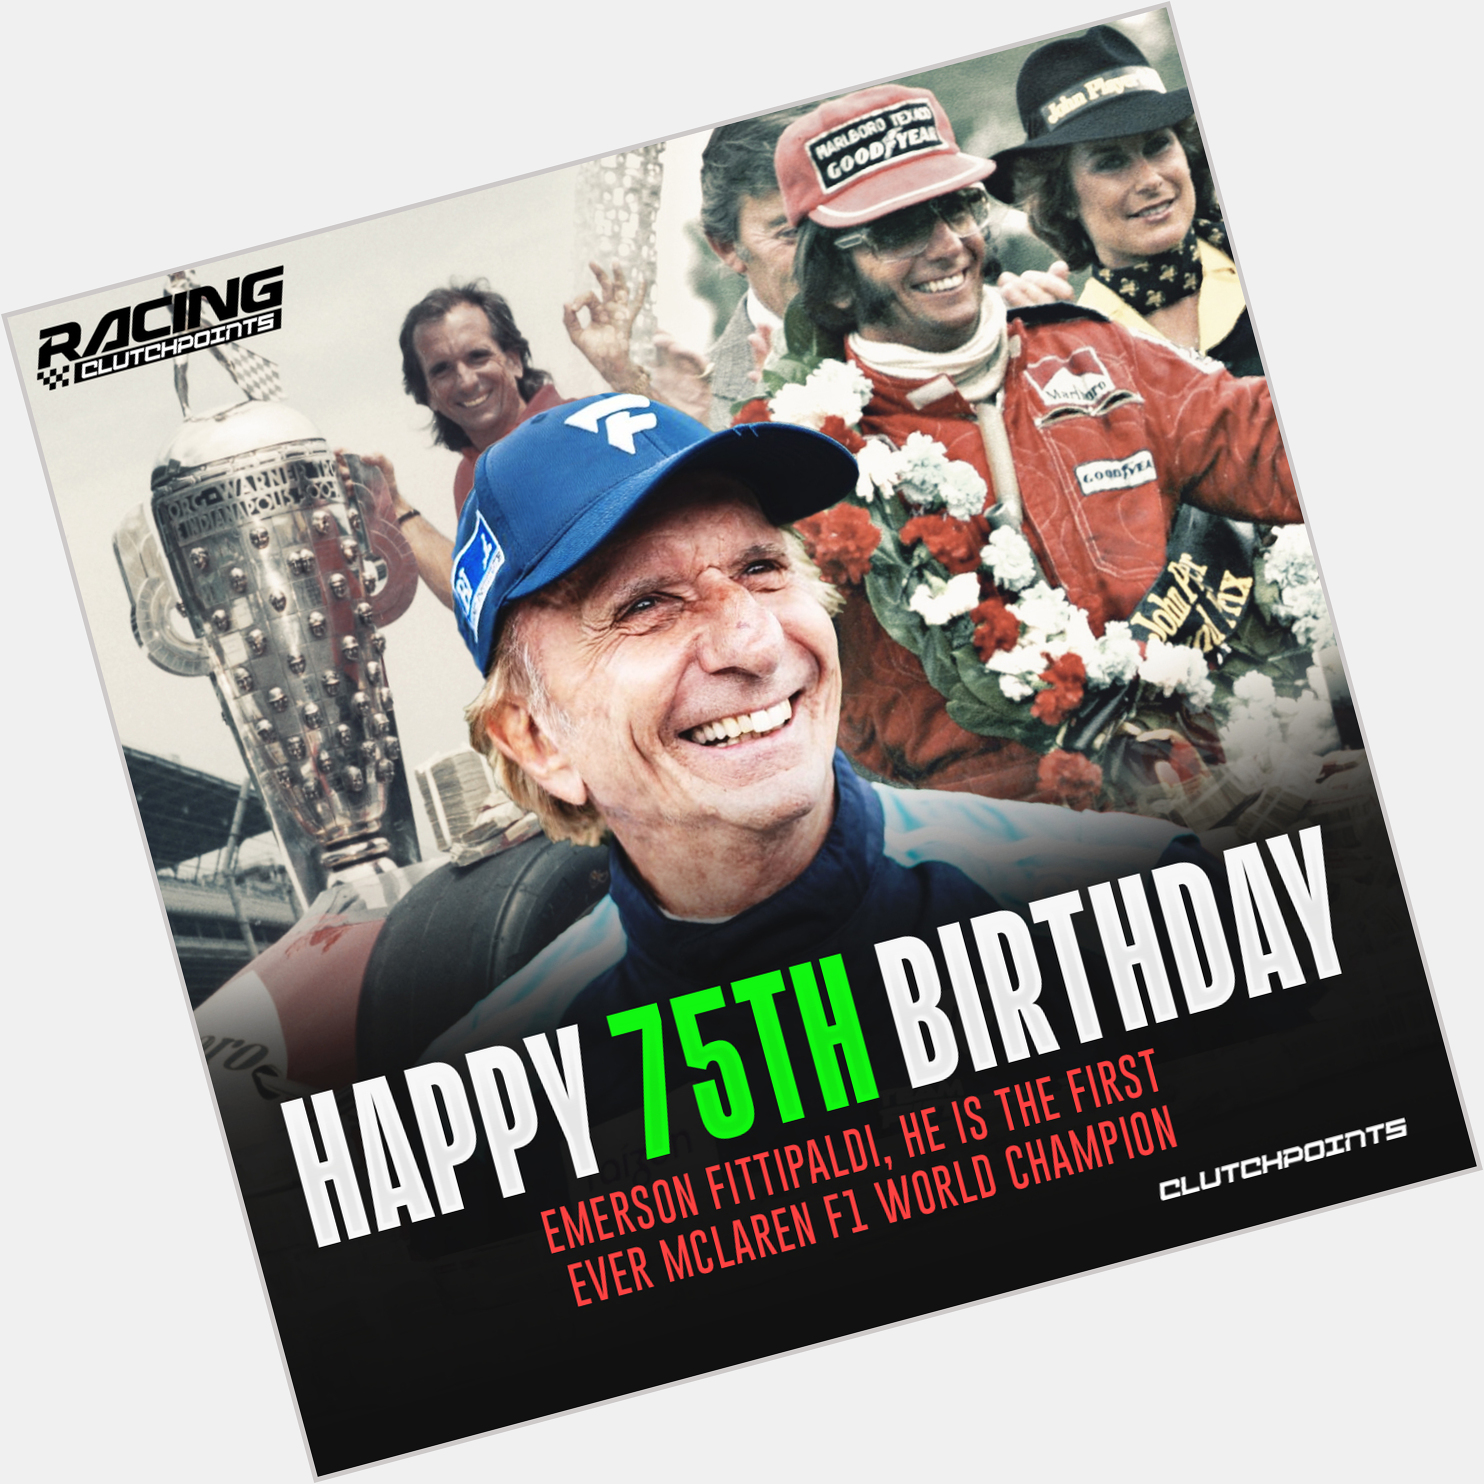 Racing fans, join us in greeting Emerson Fittipaldi, a happy 75th birthday! 